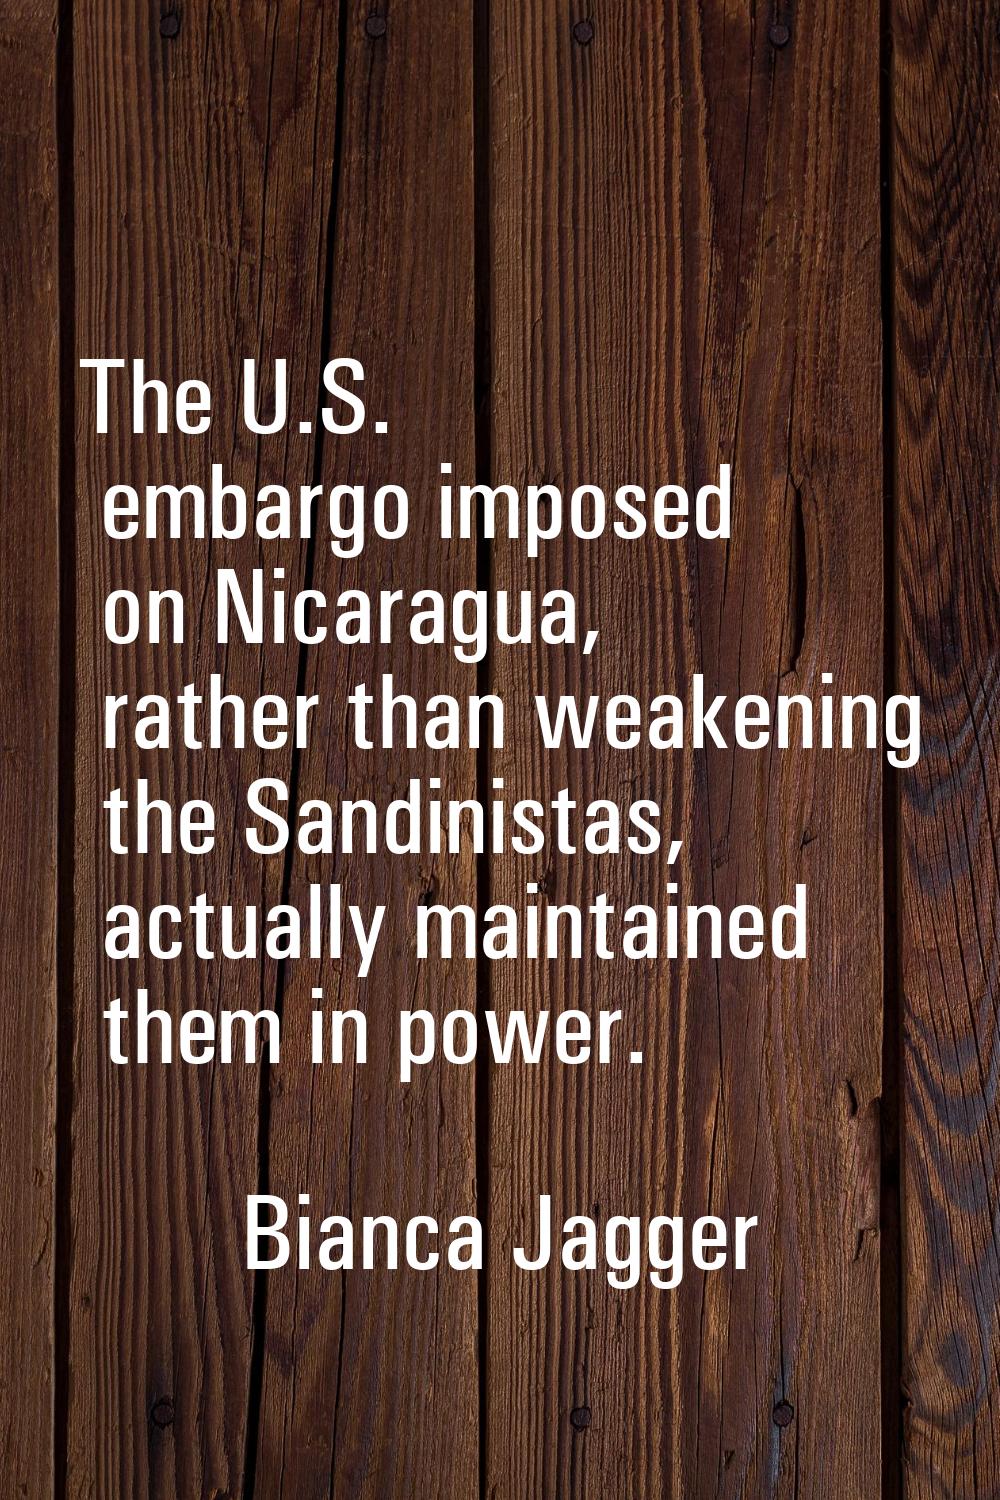 The U.S. embargo imposed on Nicaragua, rather than weakening the Sandinistas, actually maintained t